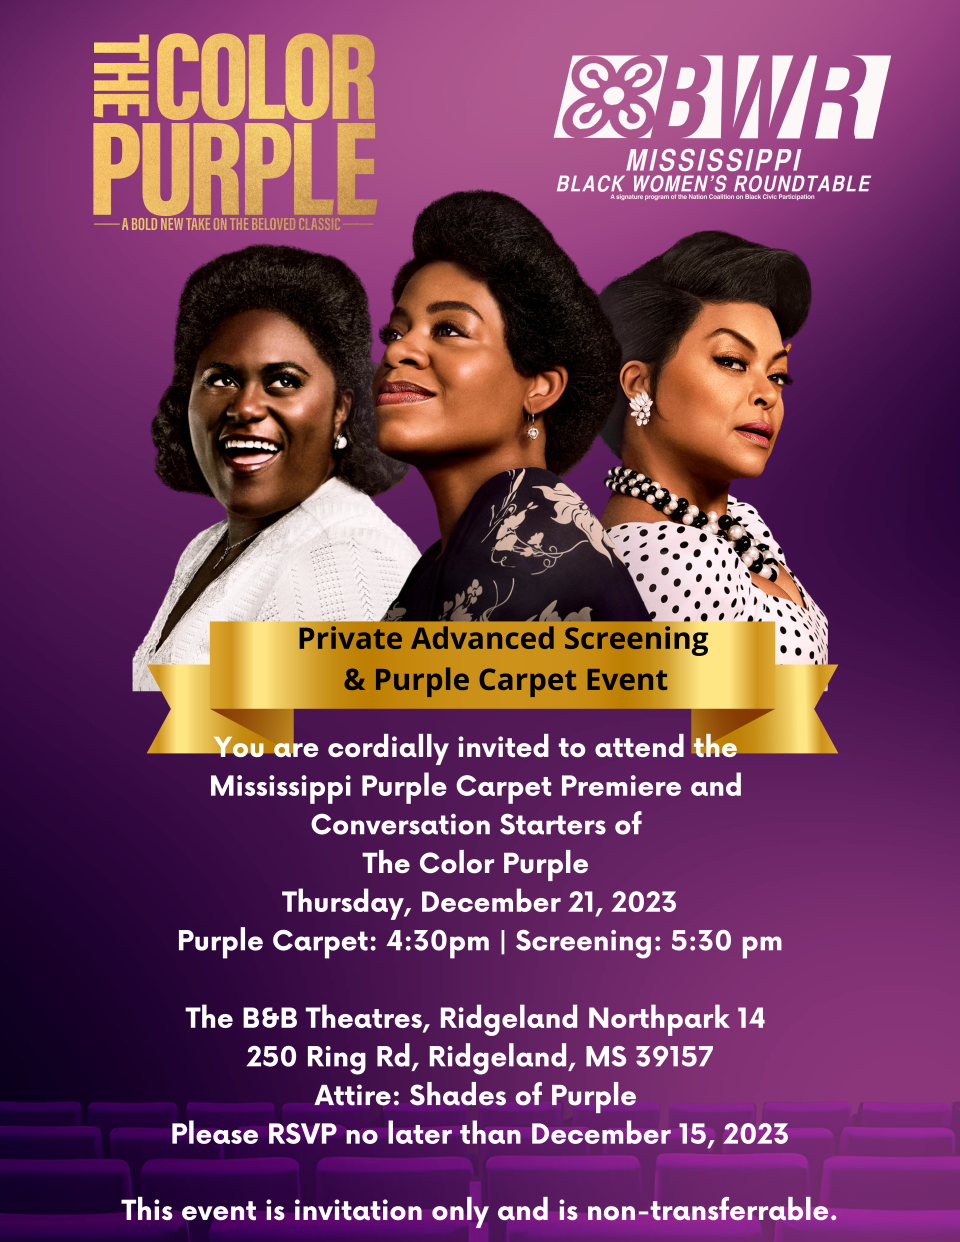 The Color Purple private screening flyer